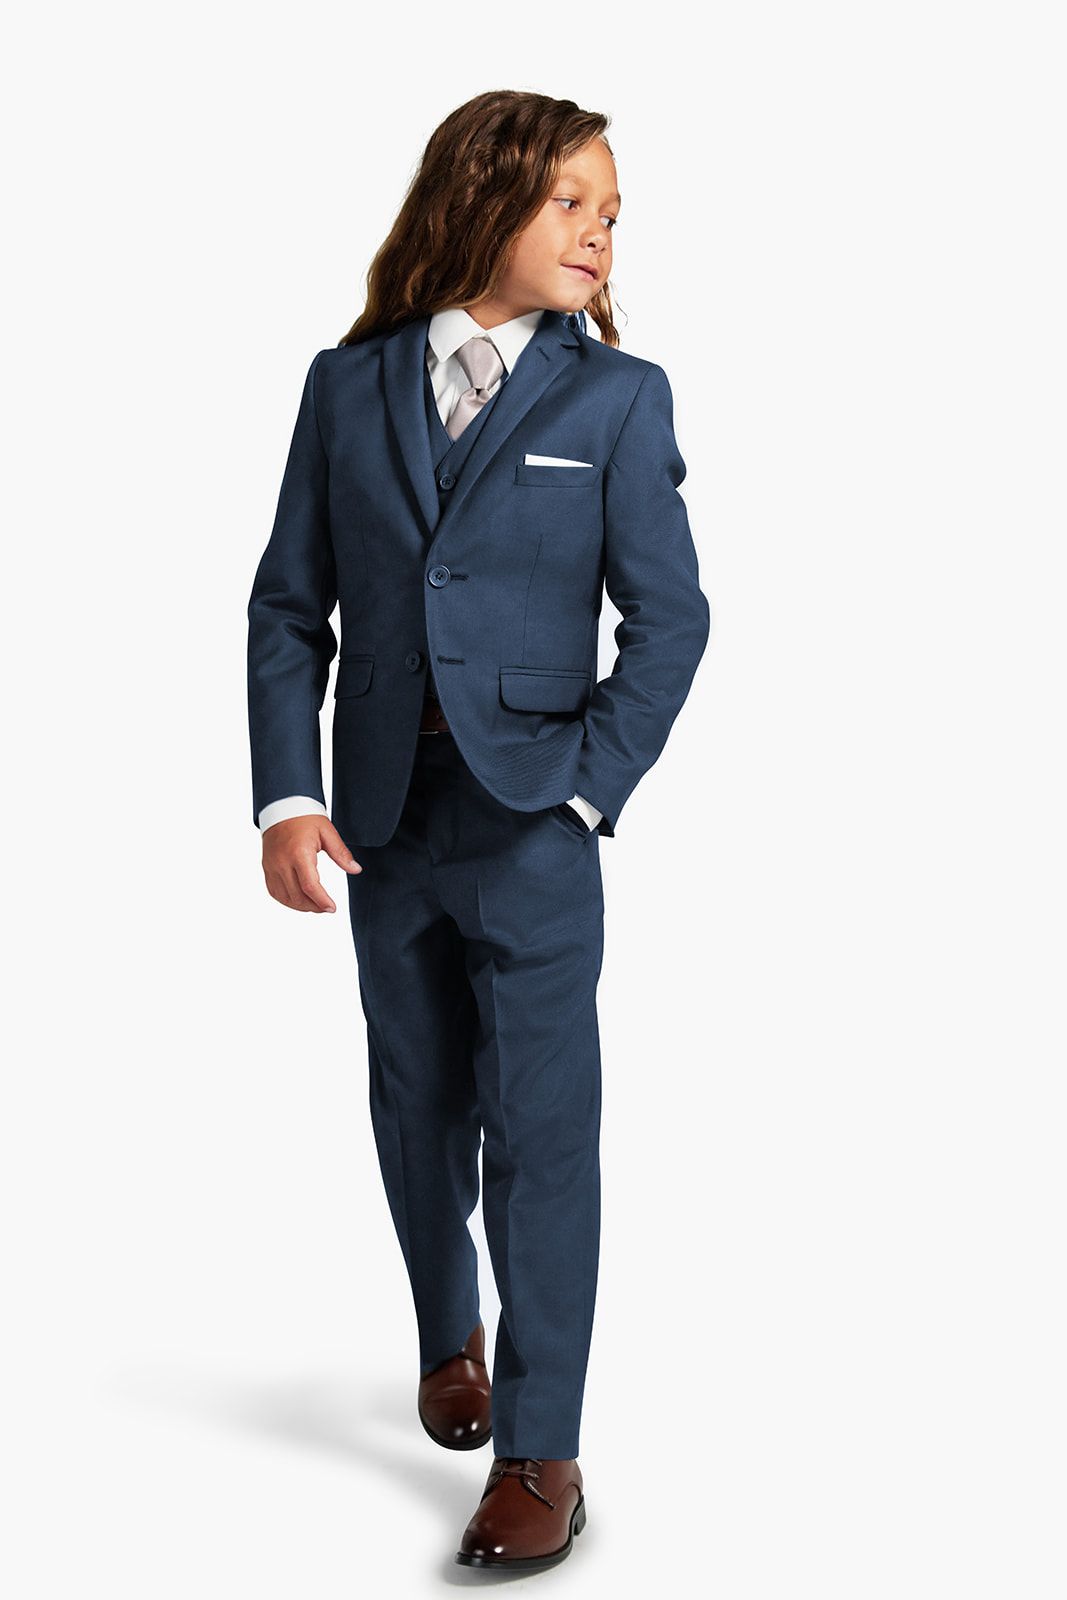 Slate Blue Suit for kids, boys, children, and teens